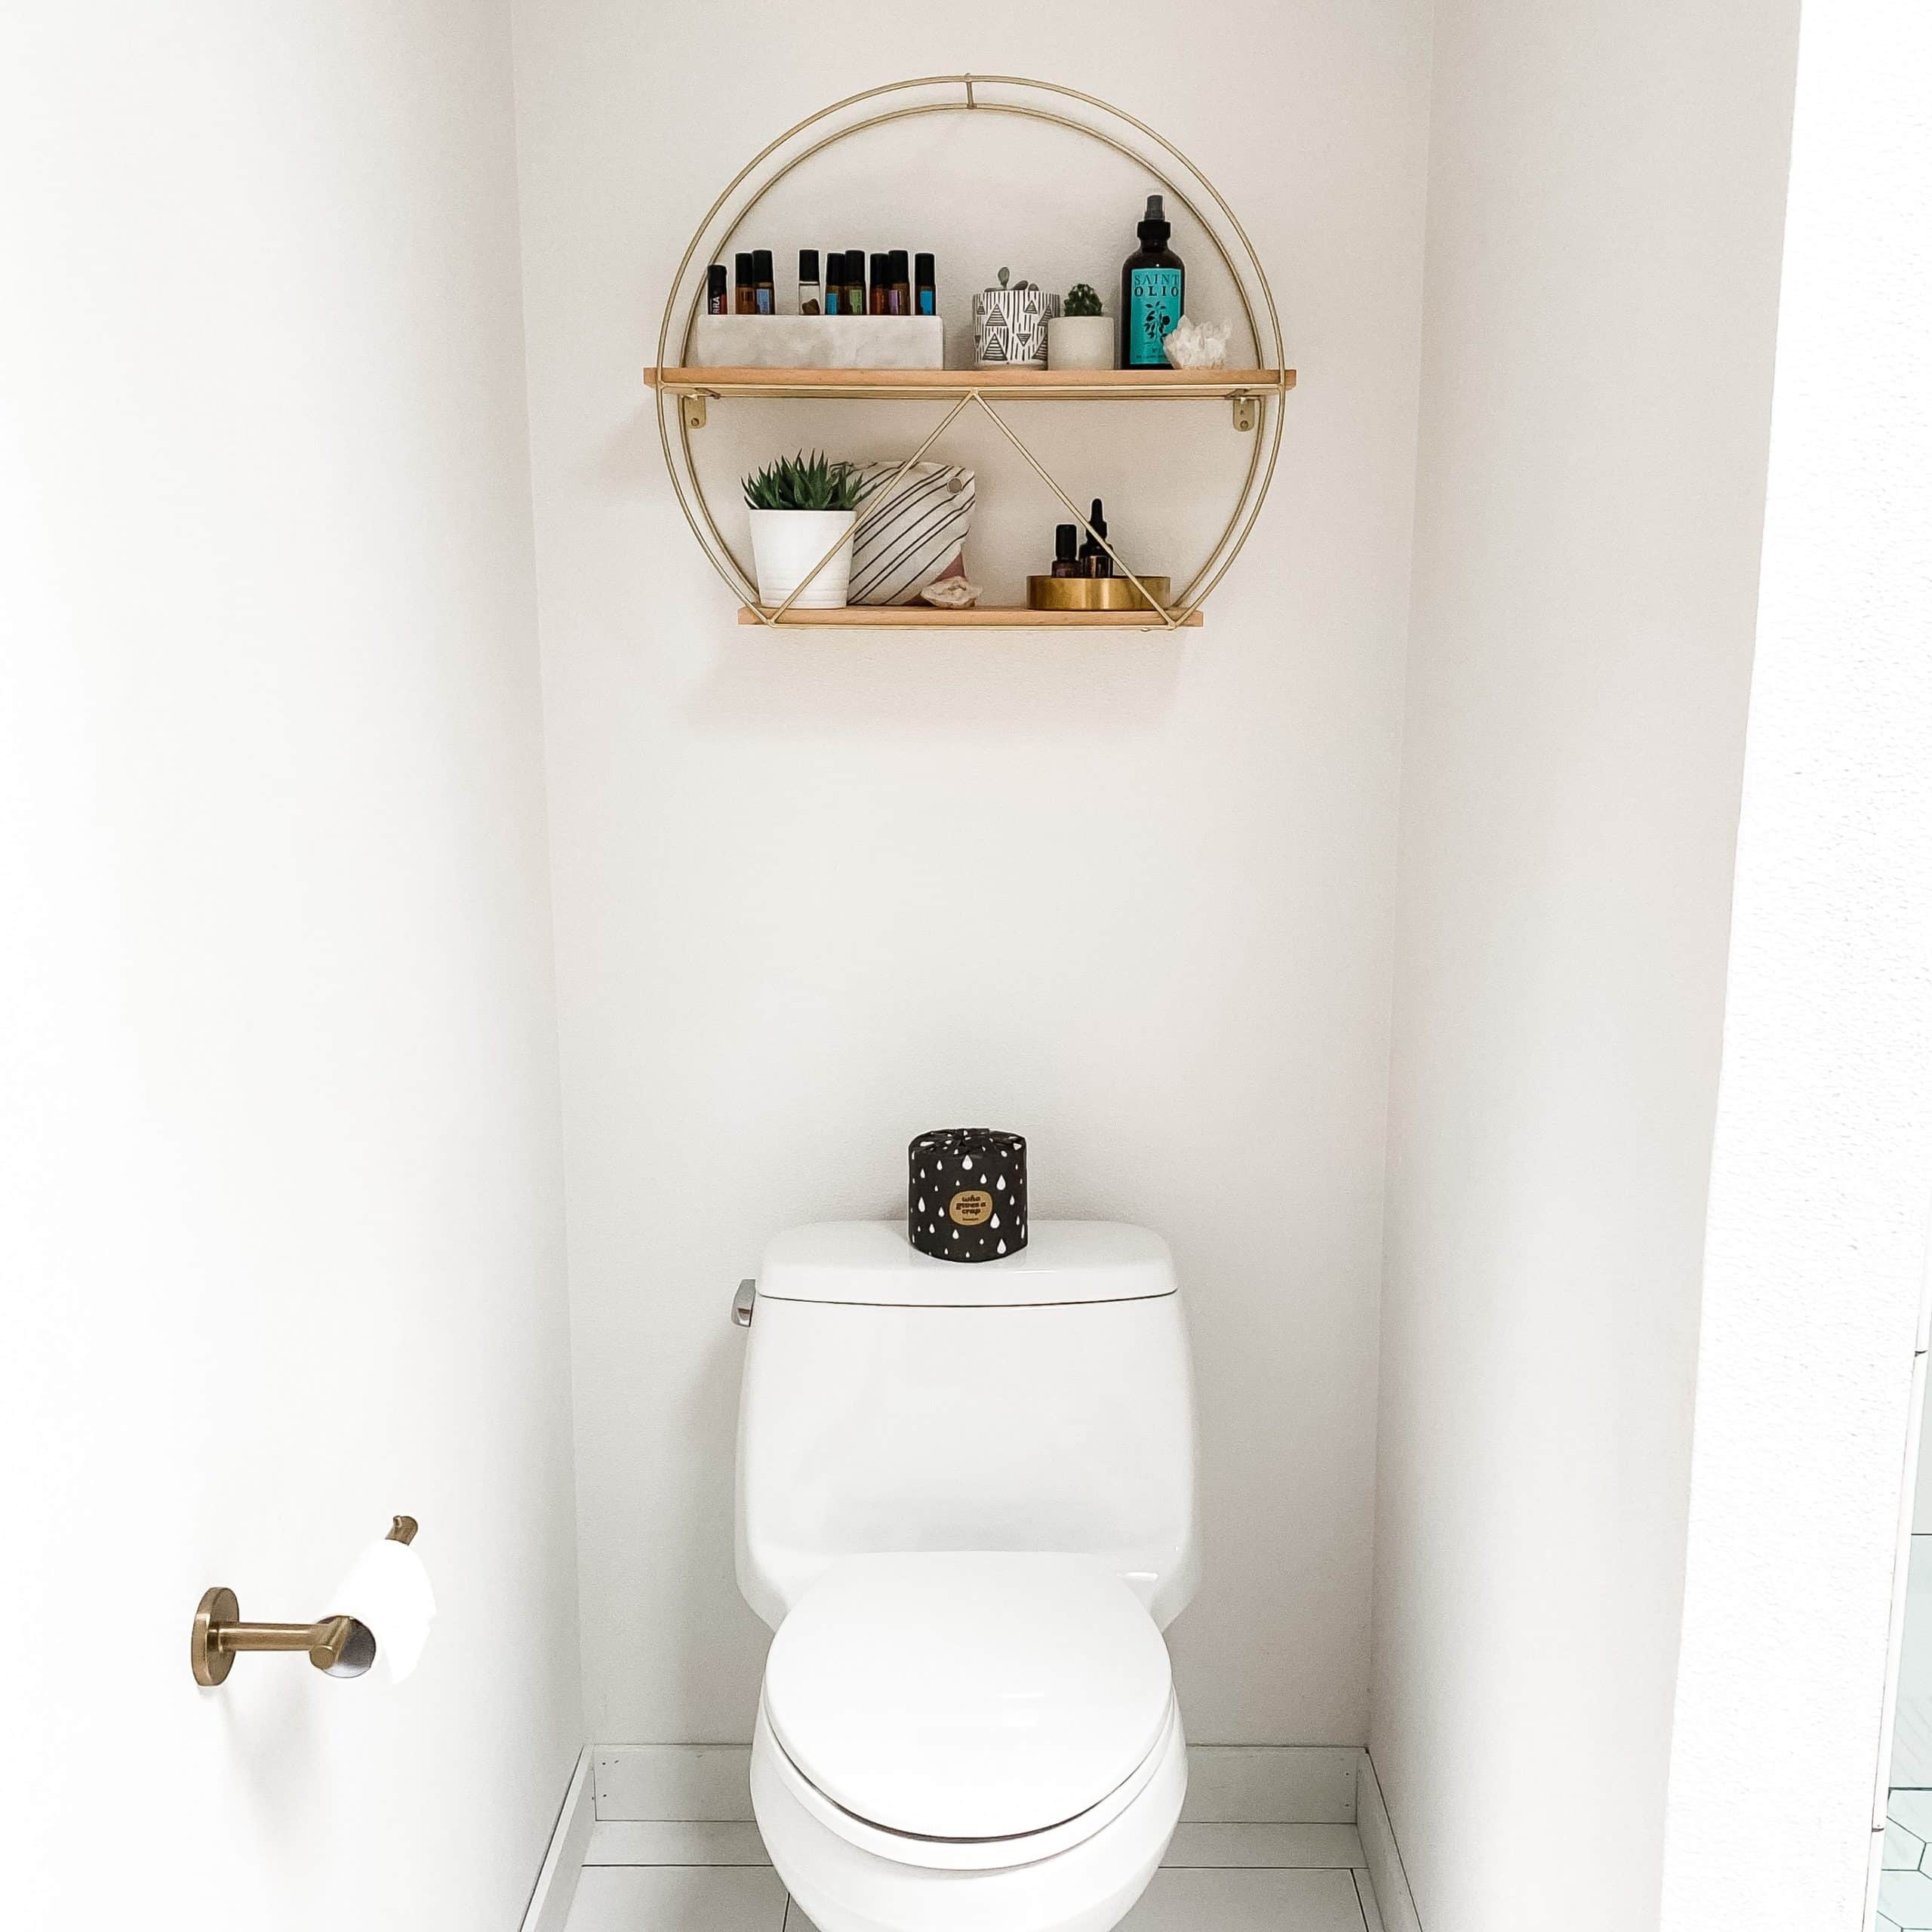 How to Diagnose, Fix, and Prevent Clogged Toilets in Your Home or Business  - Consider It Done Plumbing